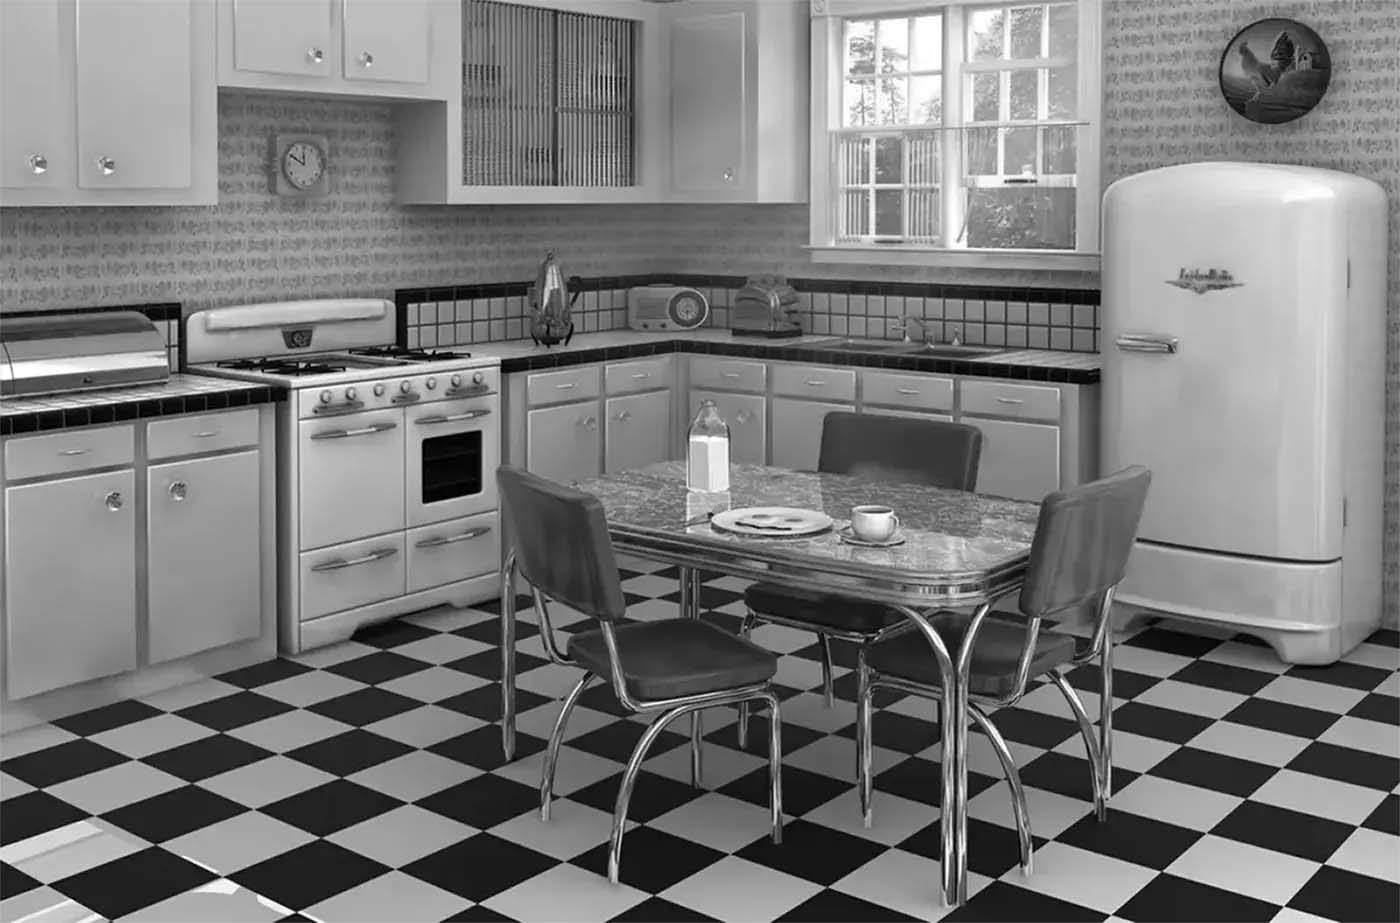 Amazing vintage photos show what kitchens looked like between the 1940s and 1950s